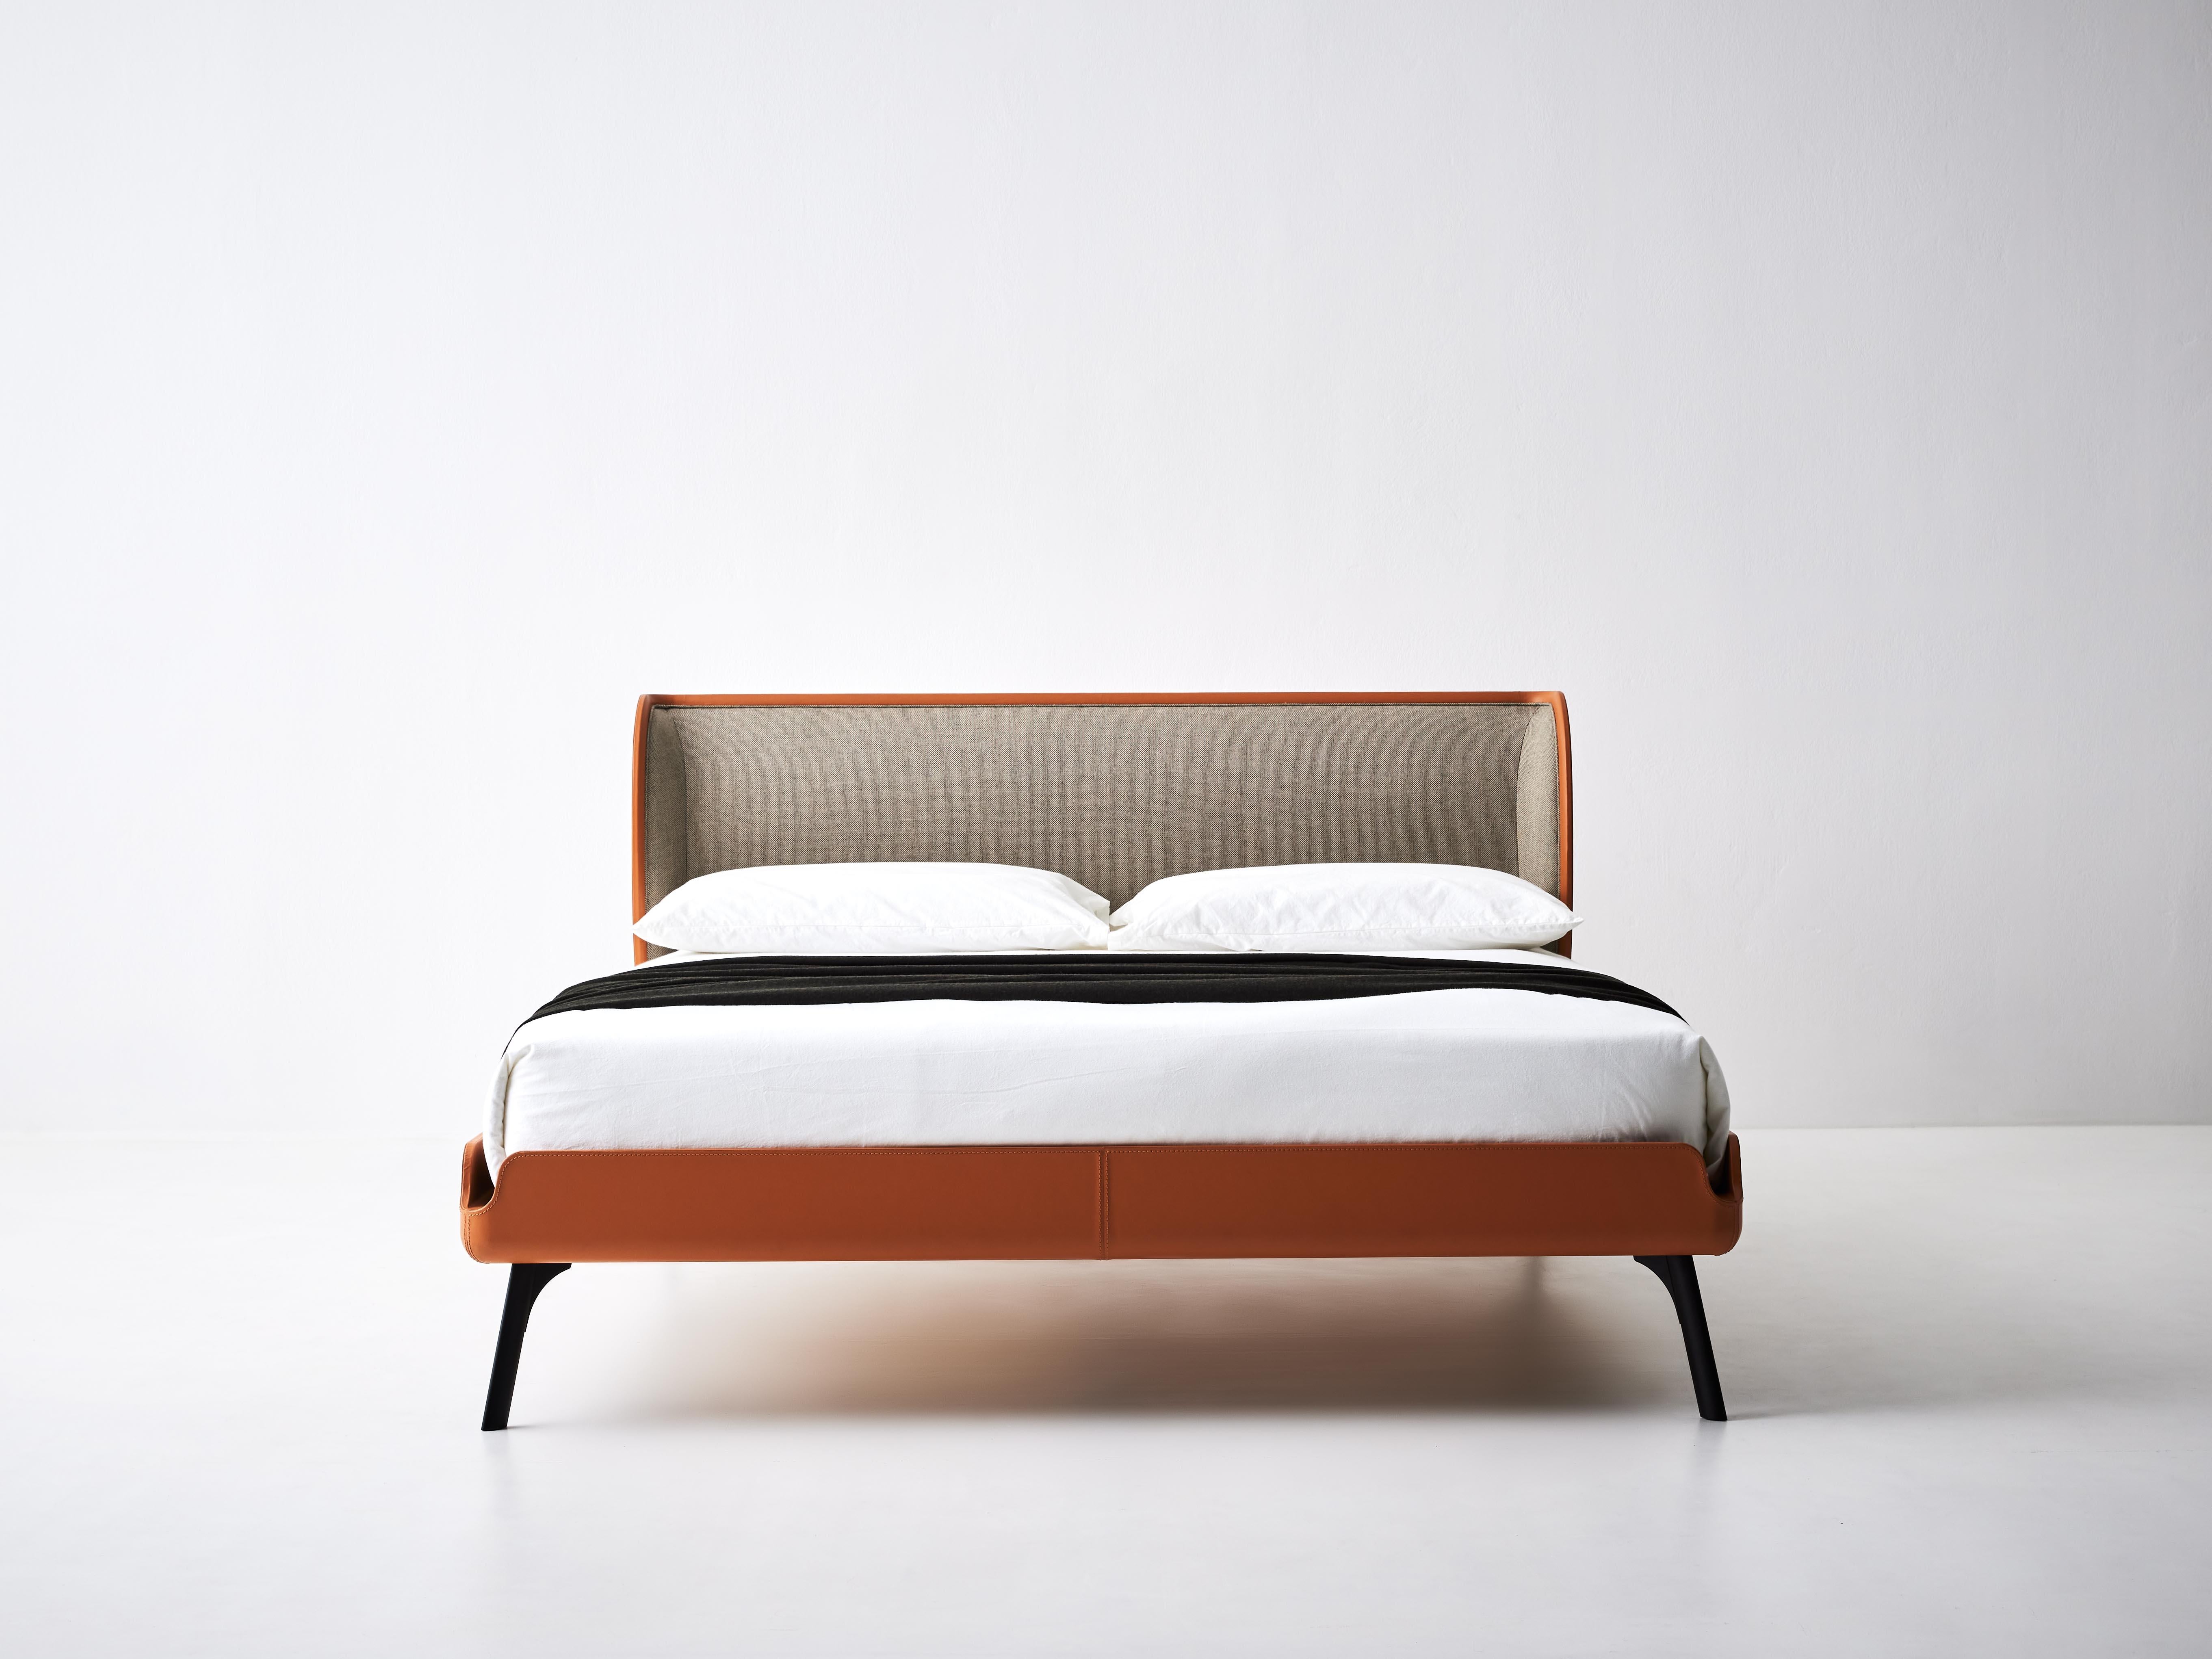 A hug is a hug: what's the point of labelling it? For this, it does not matter if Gabri is a classic or contemporary bed. Arguably, it's both, with the enveloping, sensual lines of the headboard and the compact size making it perfect for both large